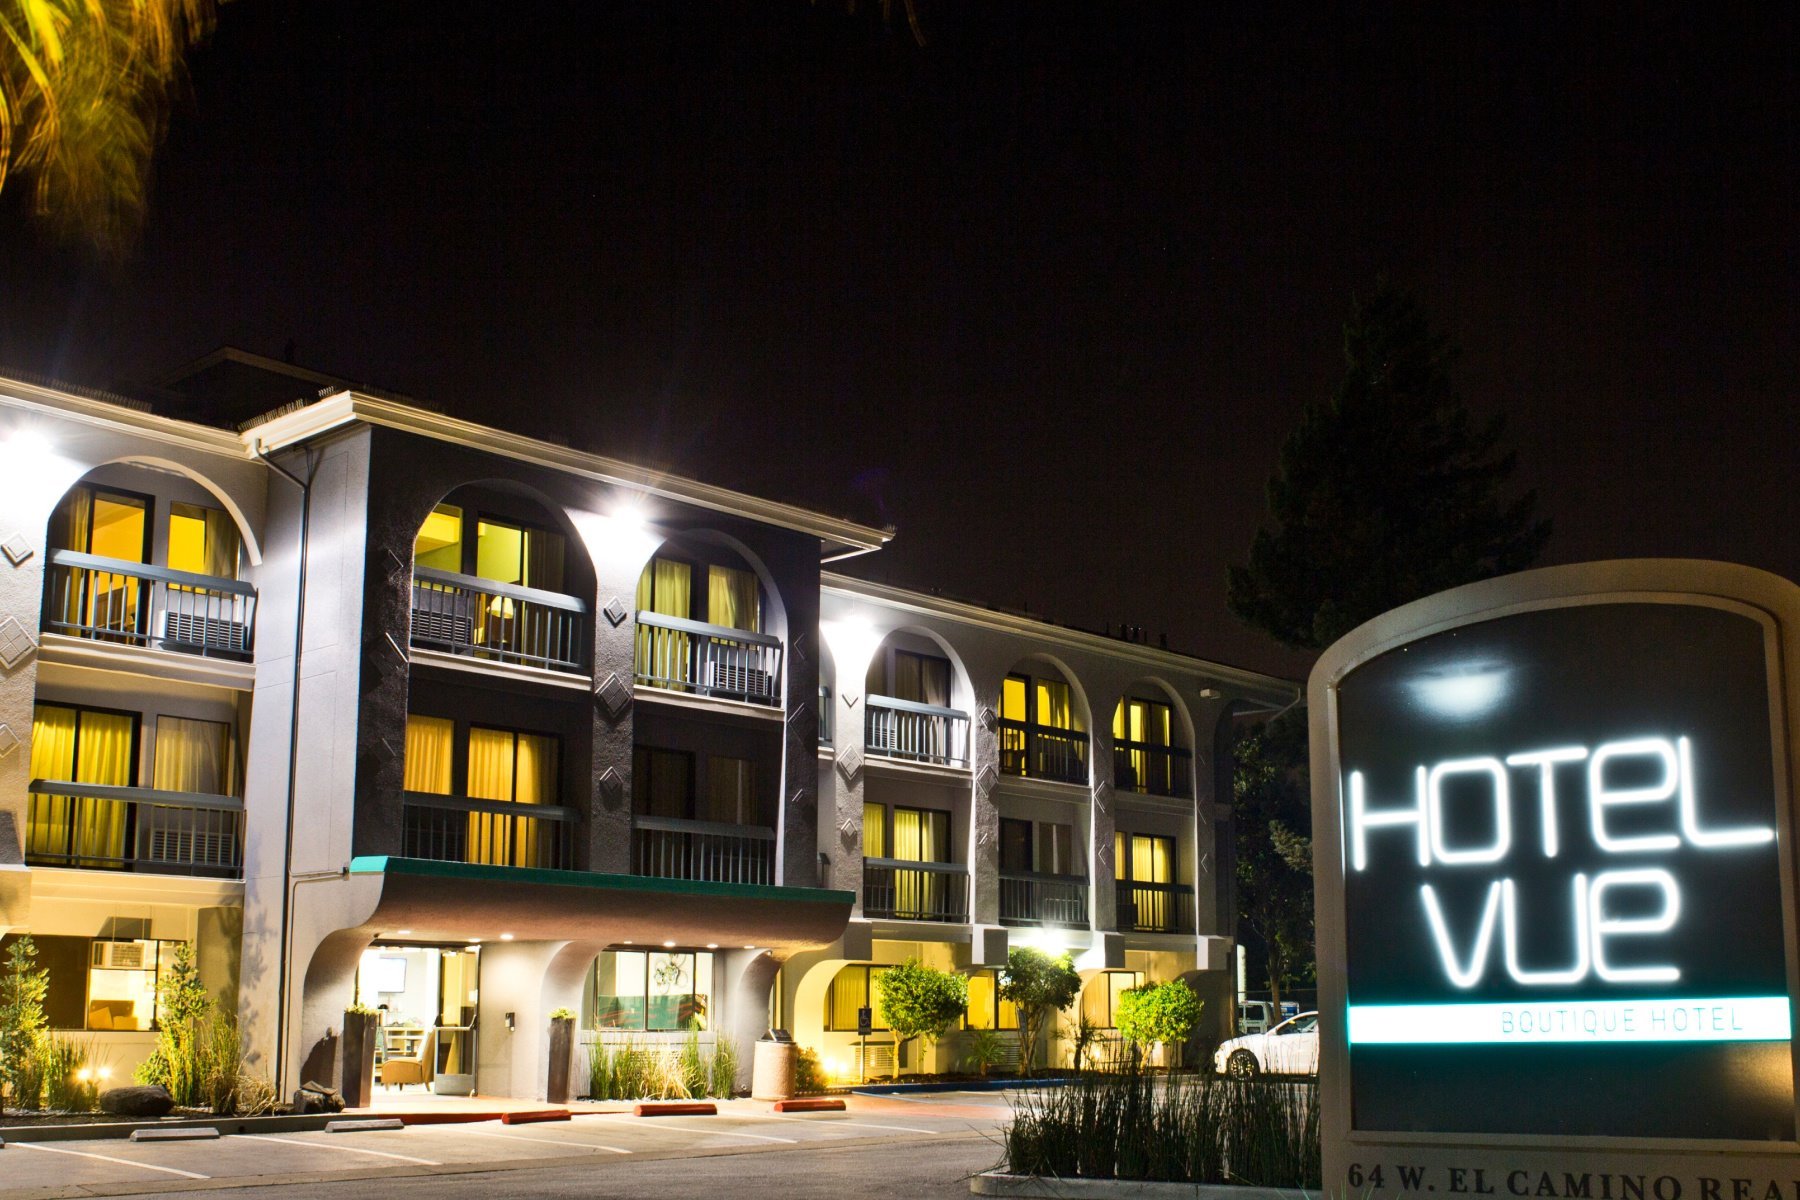 Front View of Hotel Vue, Mountain View, California